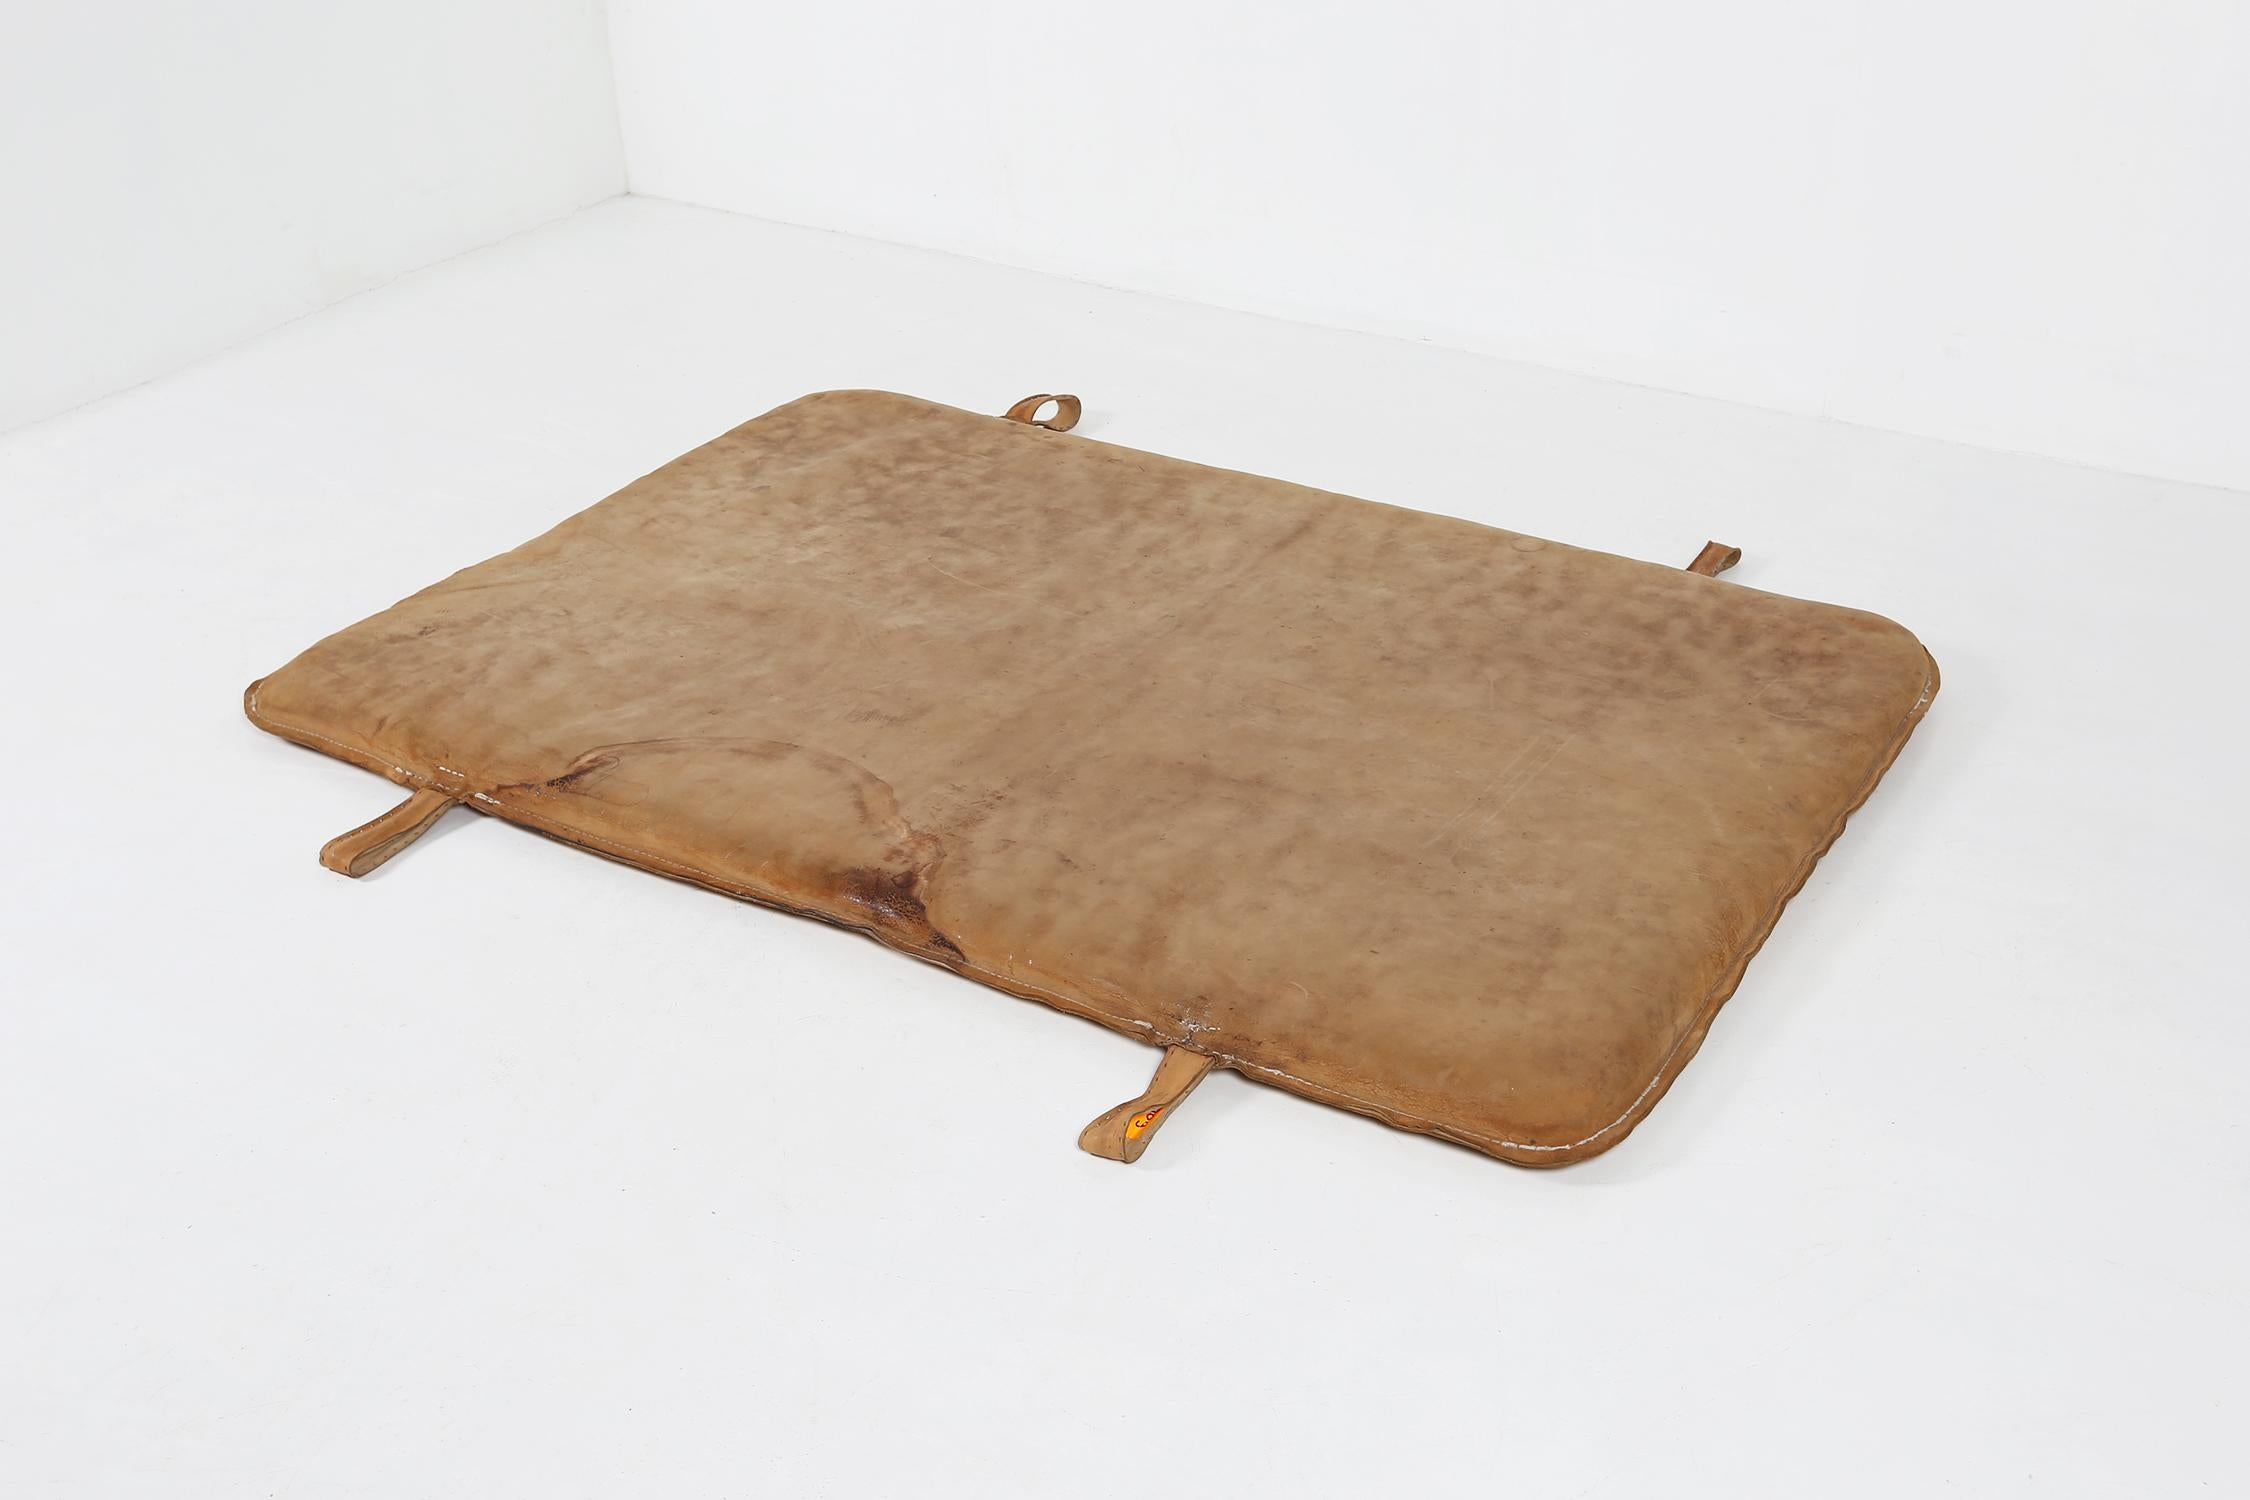 Belgium / 1930s / gym mat / brown thick cow leather / vintage / industrial

An authentic 1930s industrial brown cow leather gym mat made in Belgium. This original vintage piece made in premium brown thick cow leather with multi-purpose options. The